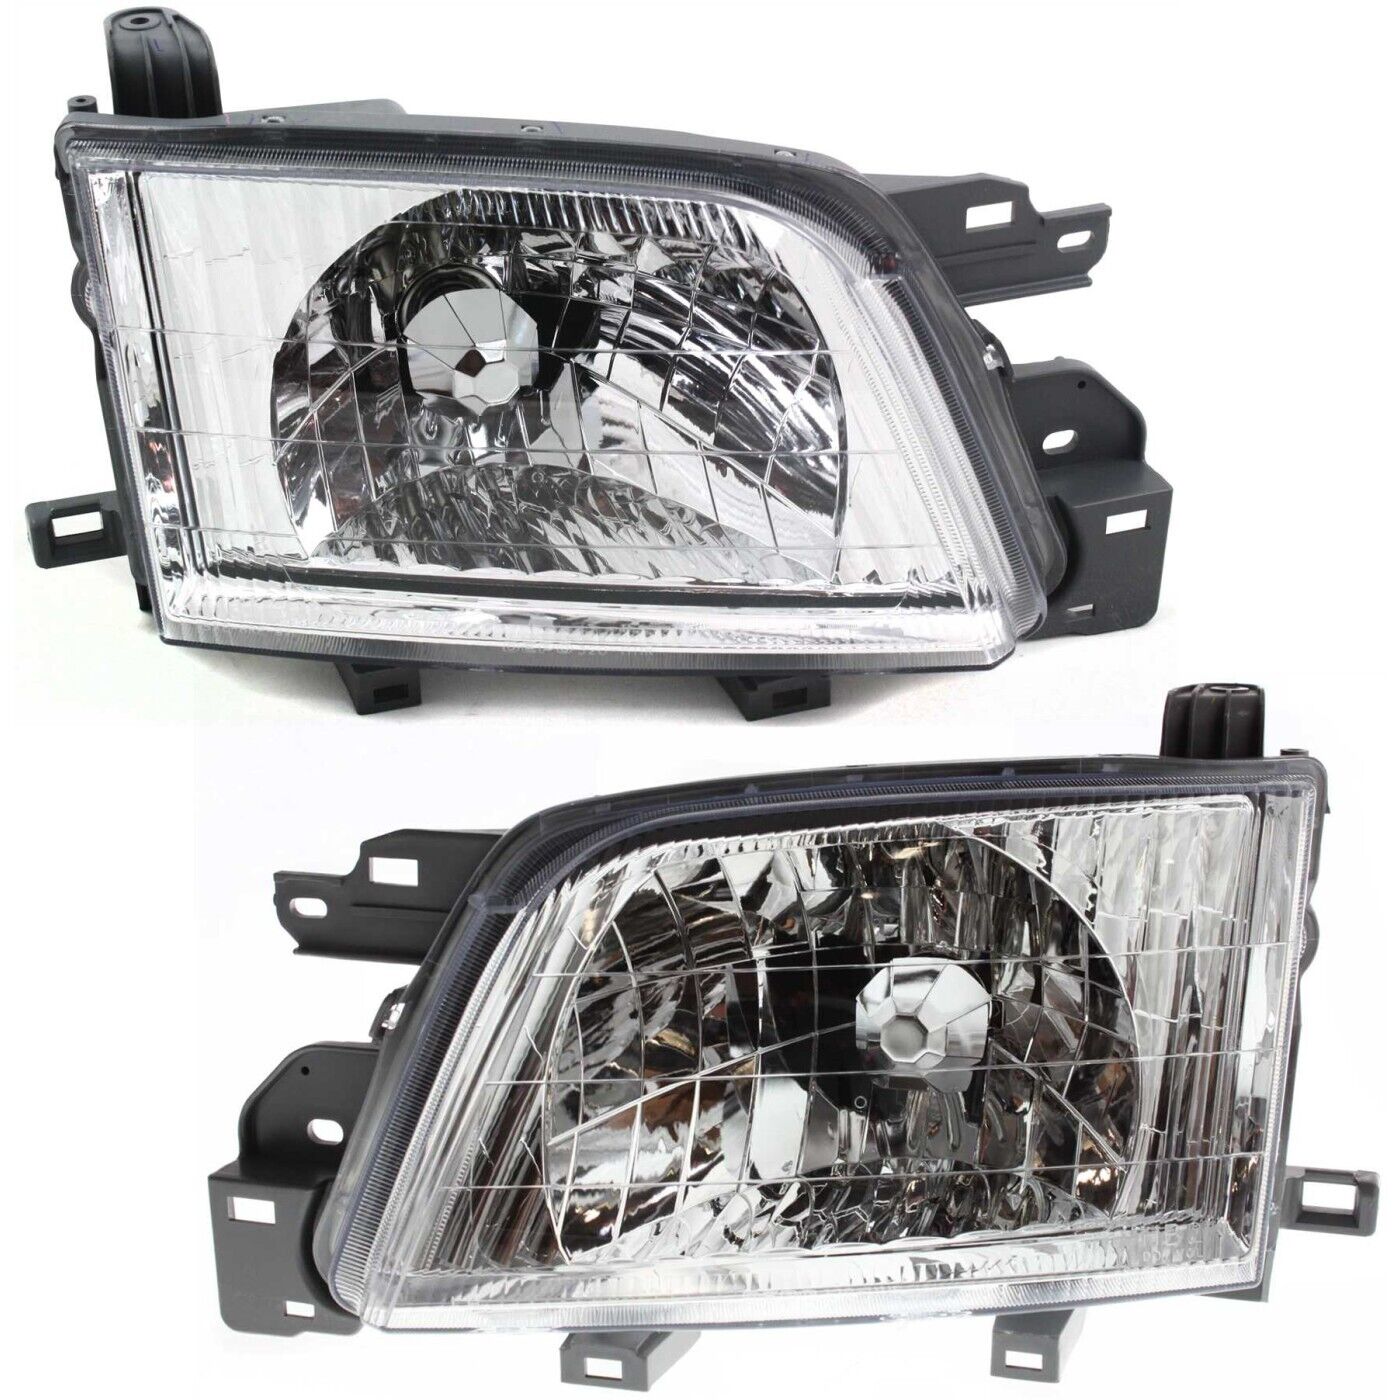 Headlight Set For 2001-2002 Subaru Forester Left and Right With Bulb 2Pc